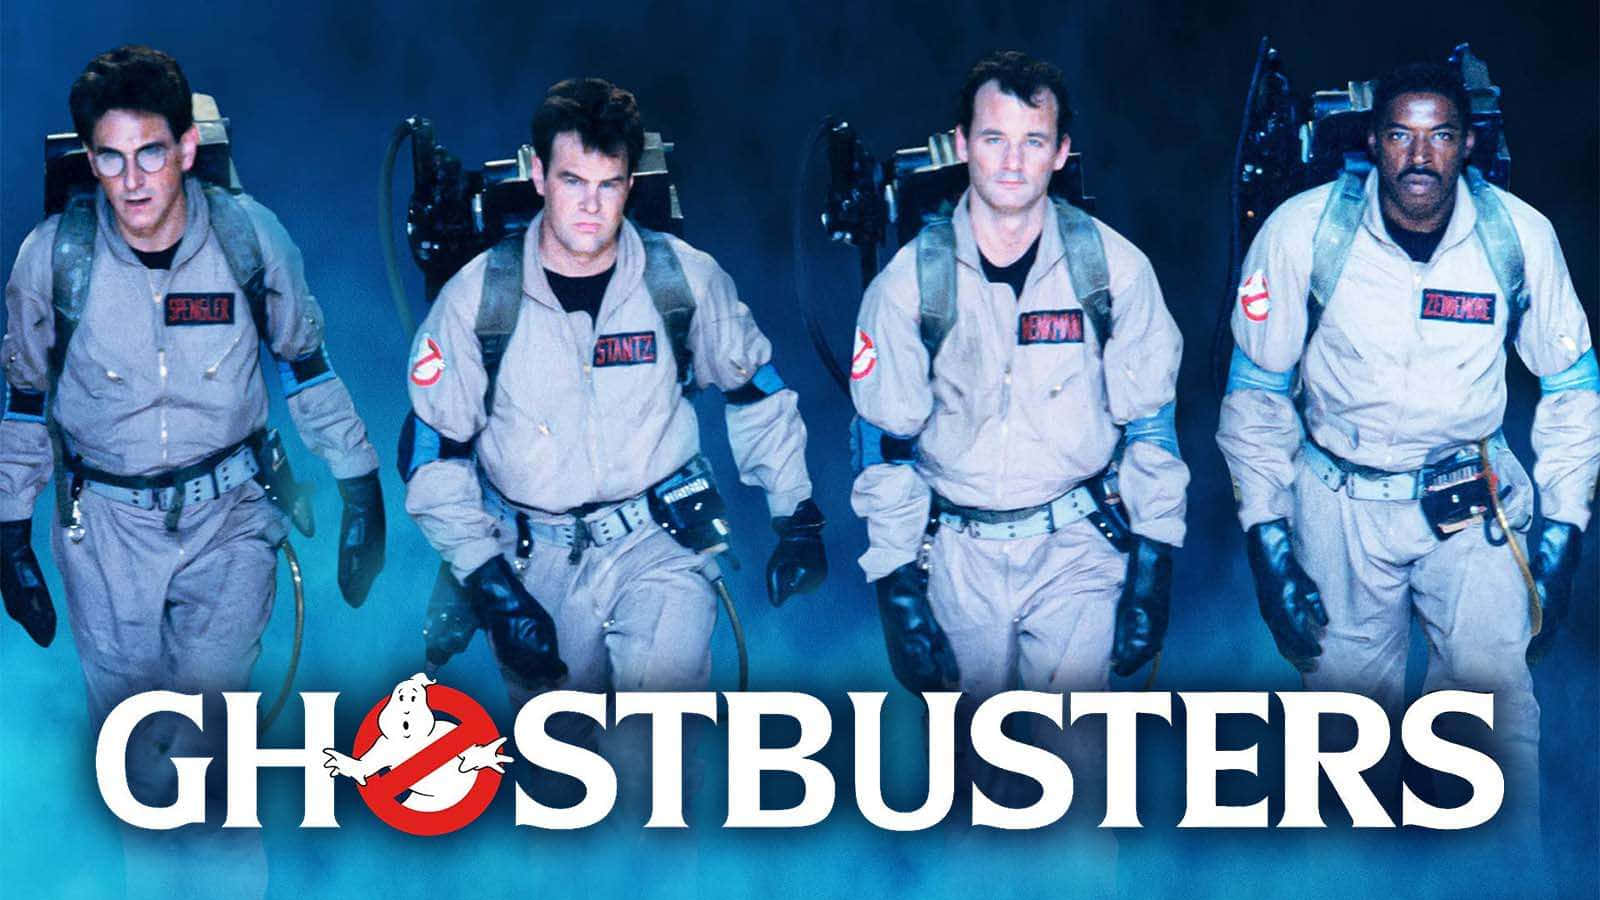 Original Ghostbusters Team in Action